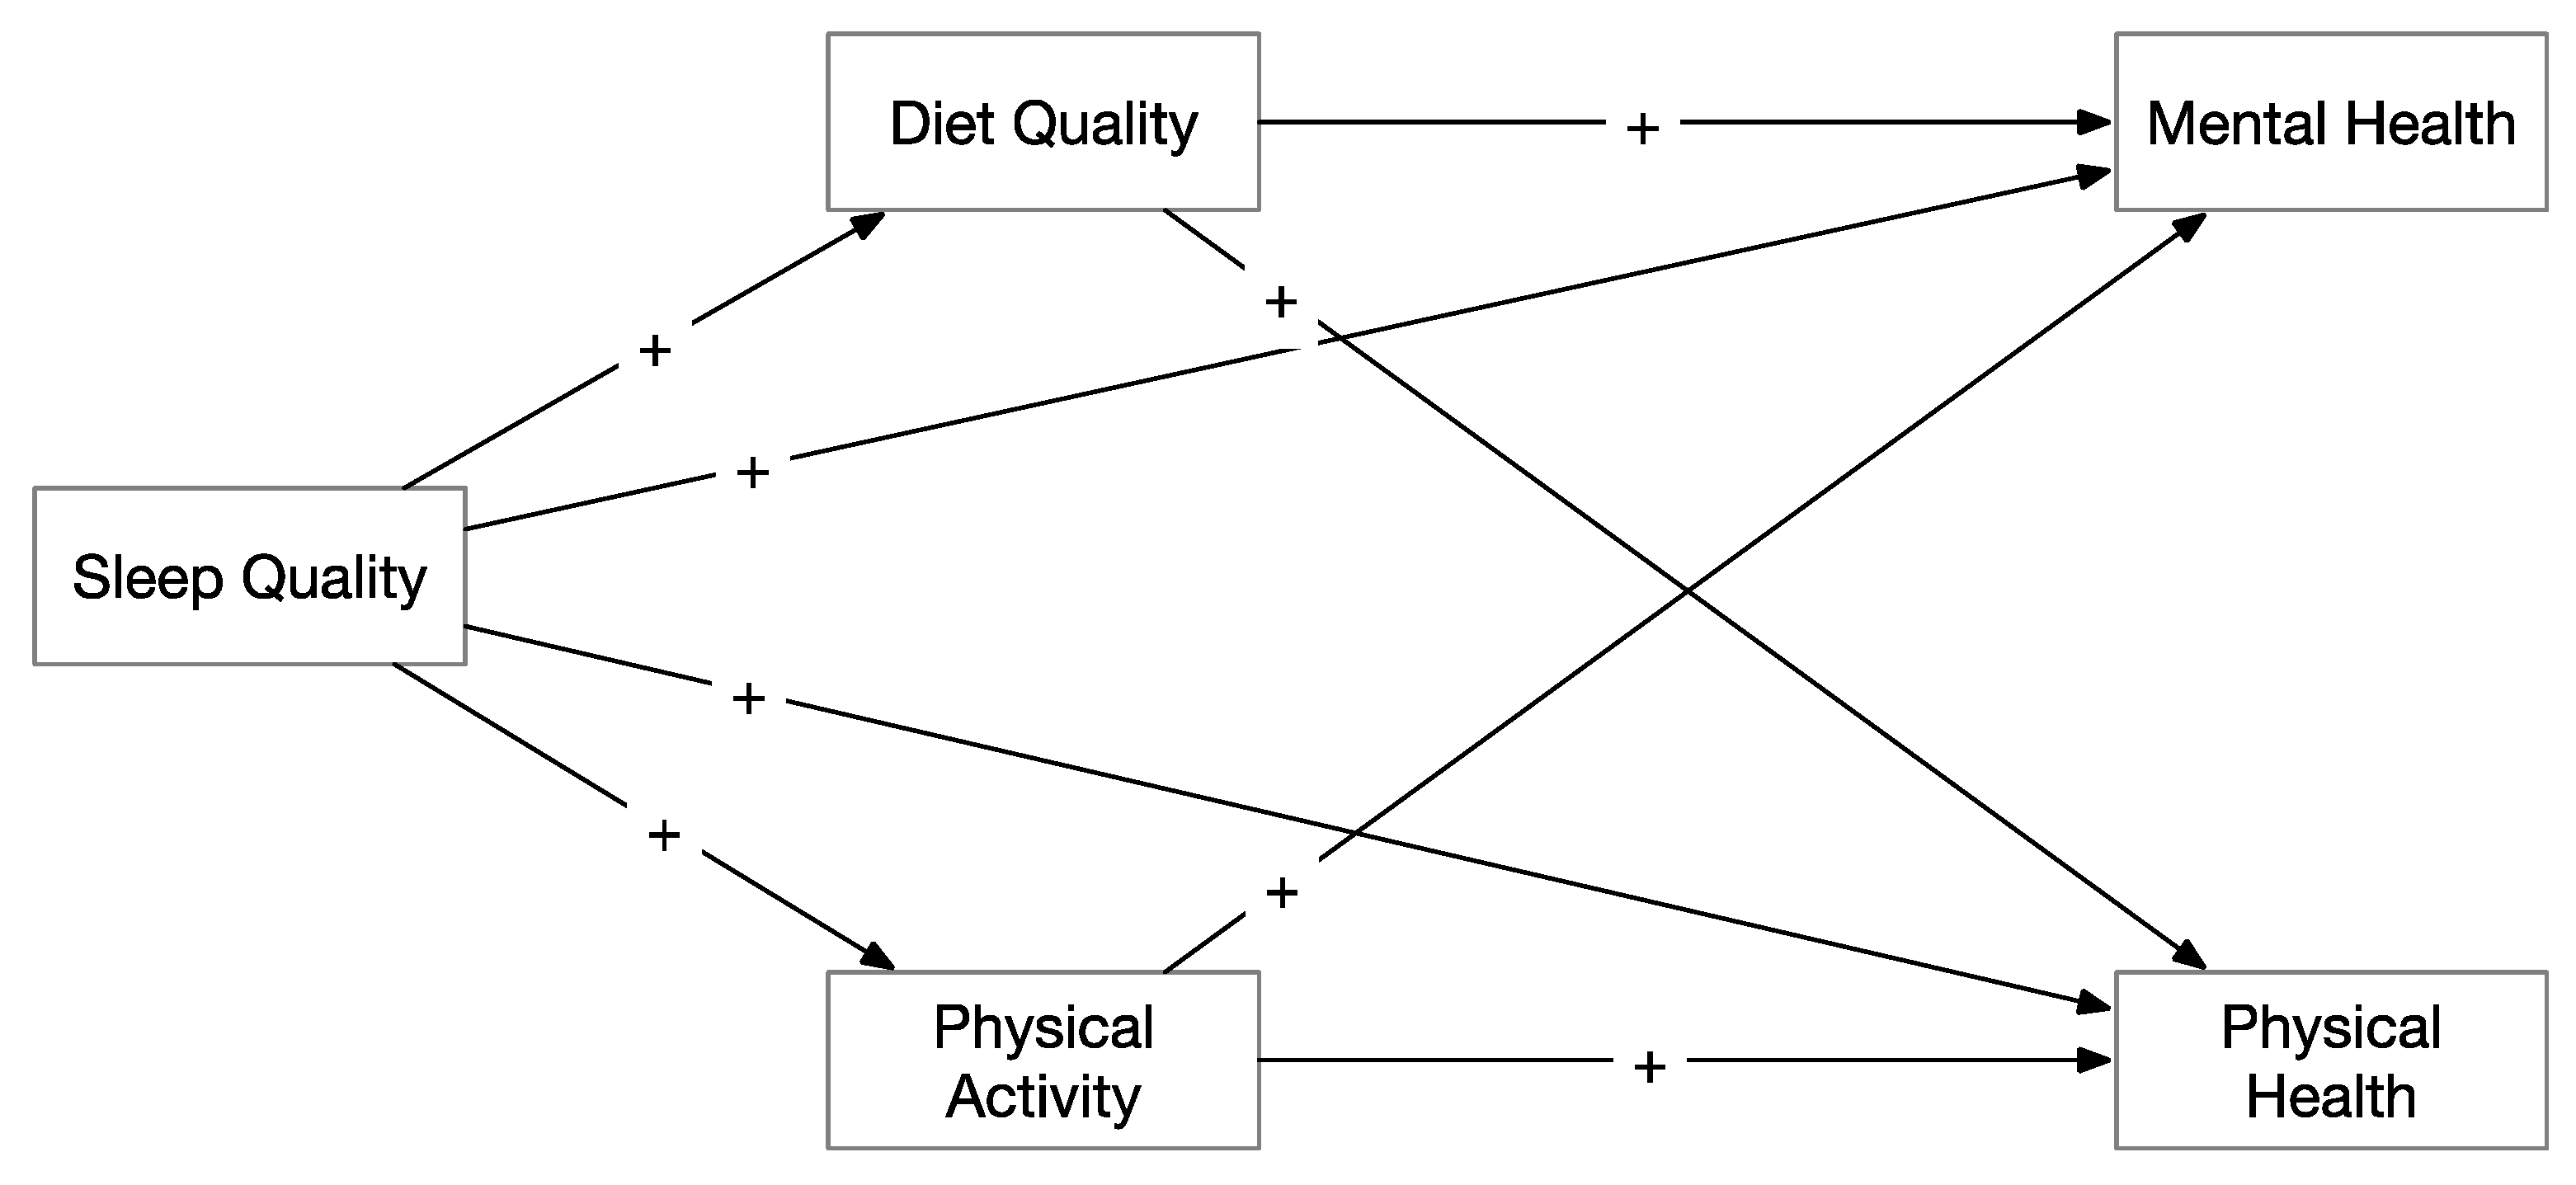 Nutrients Free Full-Text The Relationships between Sleep and Mental and Physical Health of Chinese Elderly Exploring the Mediating Roles of Diet and Physical Activity image